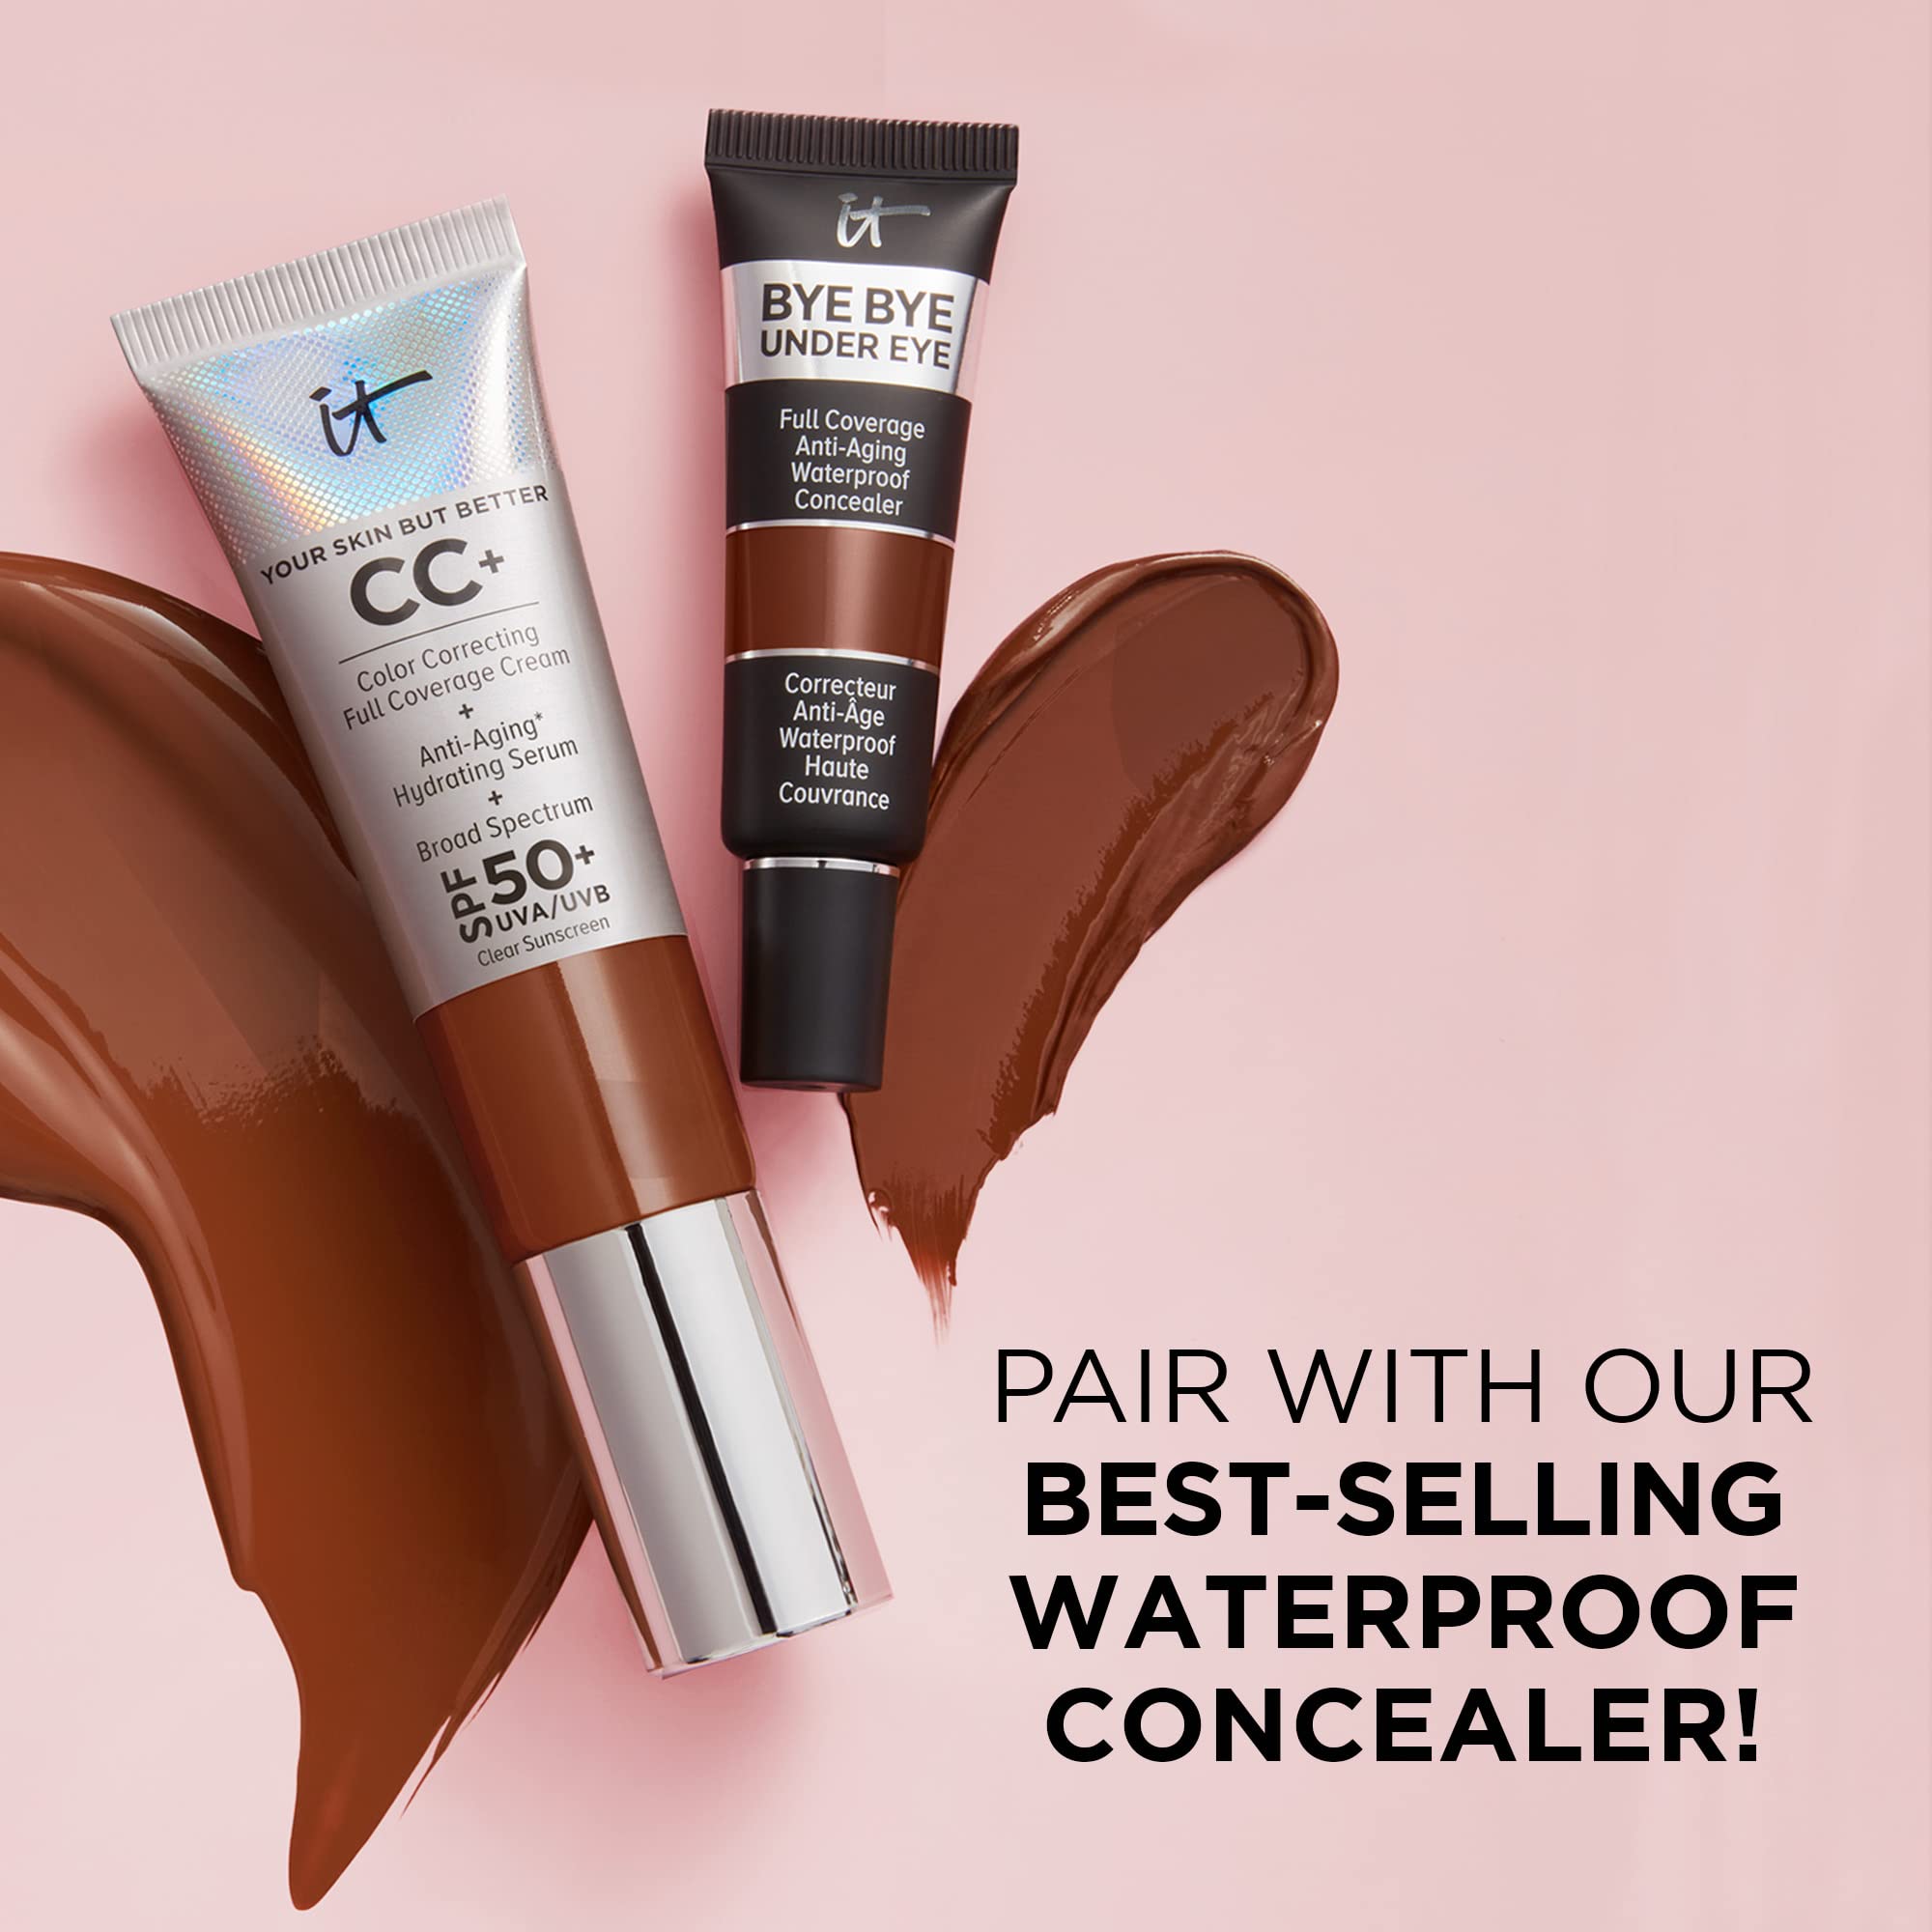 IT Cosmetics Your Skin But Better CC+ Cream - Color Correcting Cream, Full-Coverage Foundation, Hydrating Serum & SPF 50+ Sunscreen - Natural Finish - 1.08 Fl. Oz